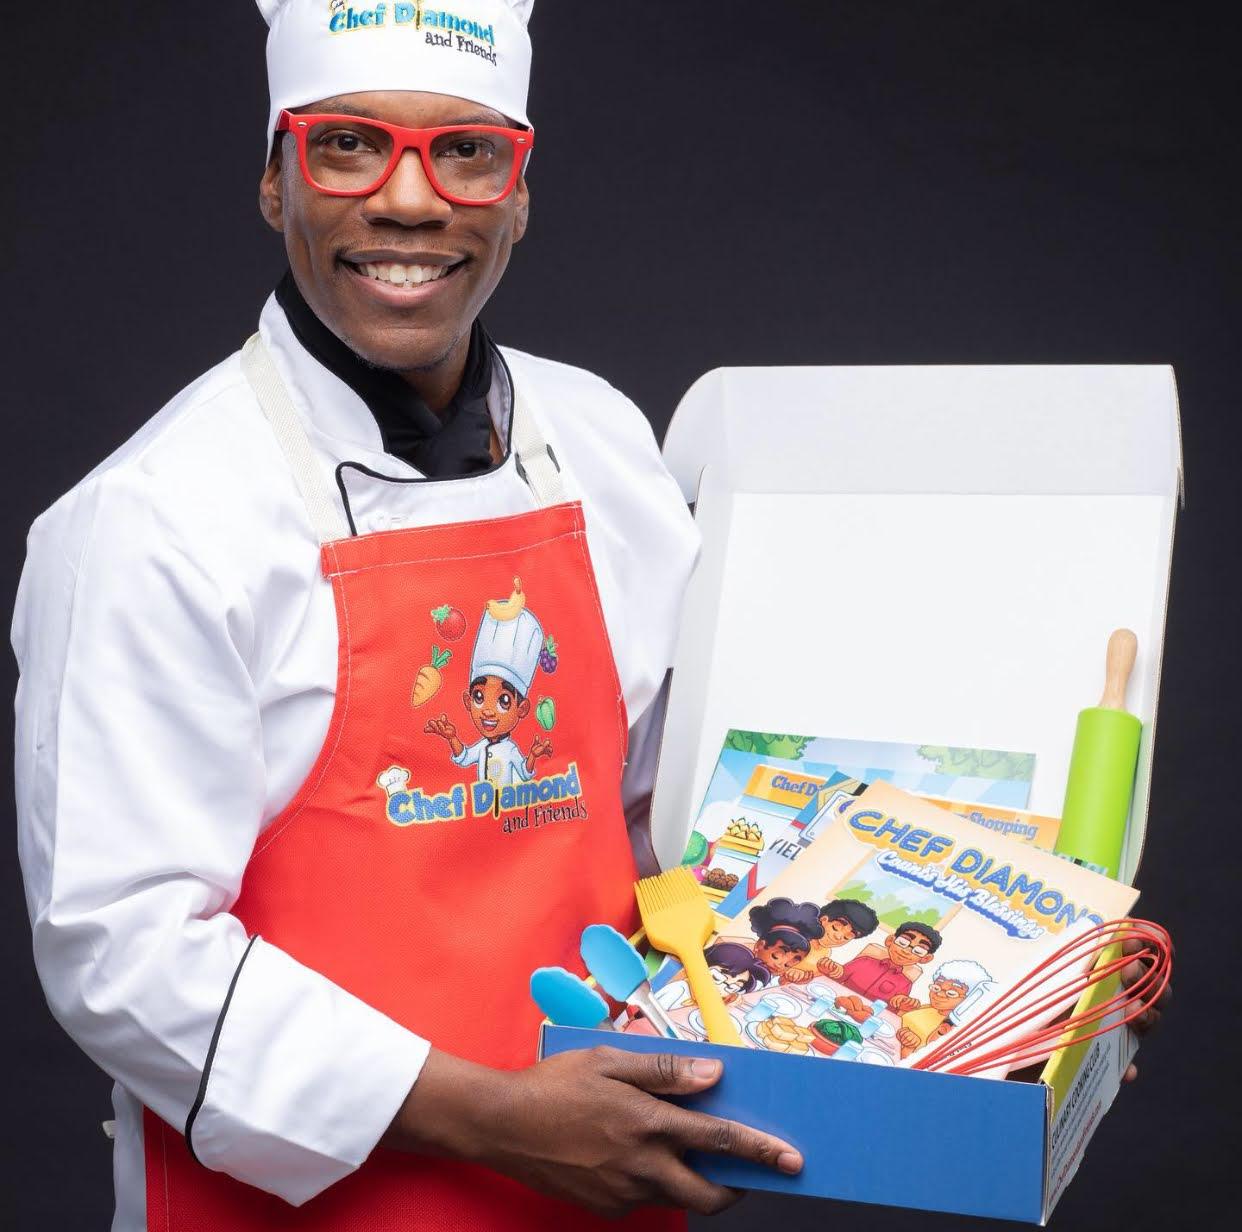 The Ultimate Chef Kit - Chef Diamond and Friends